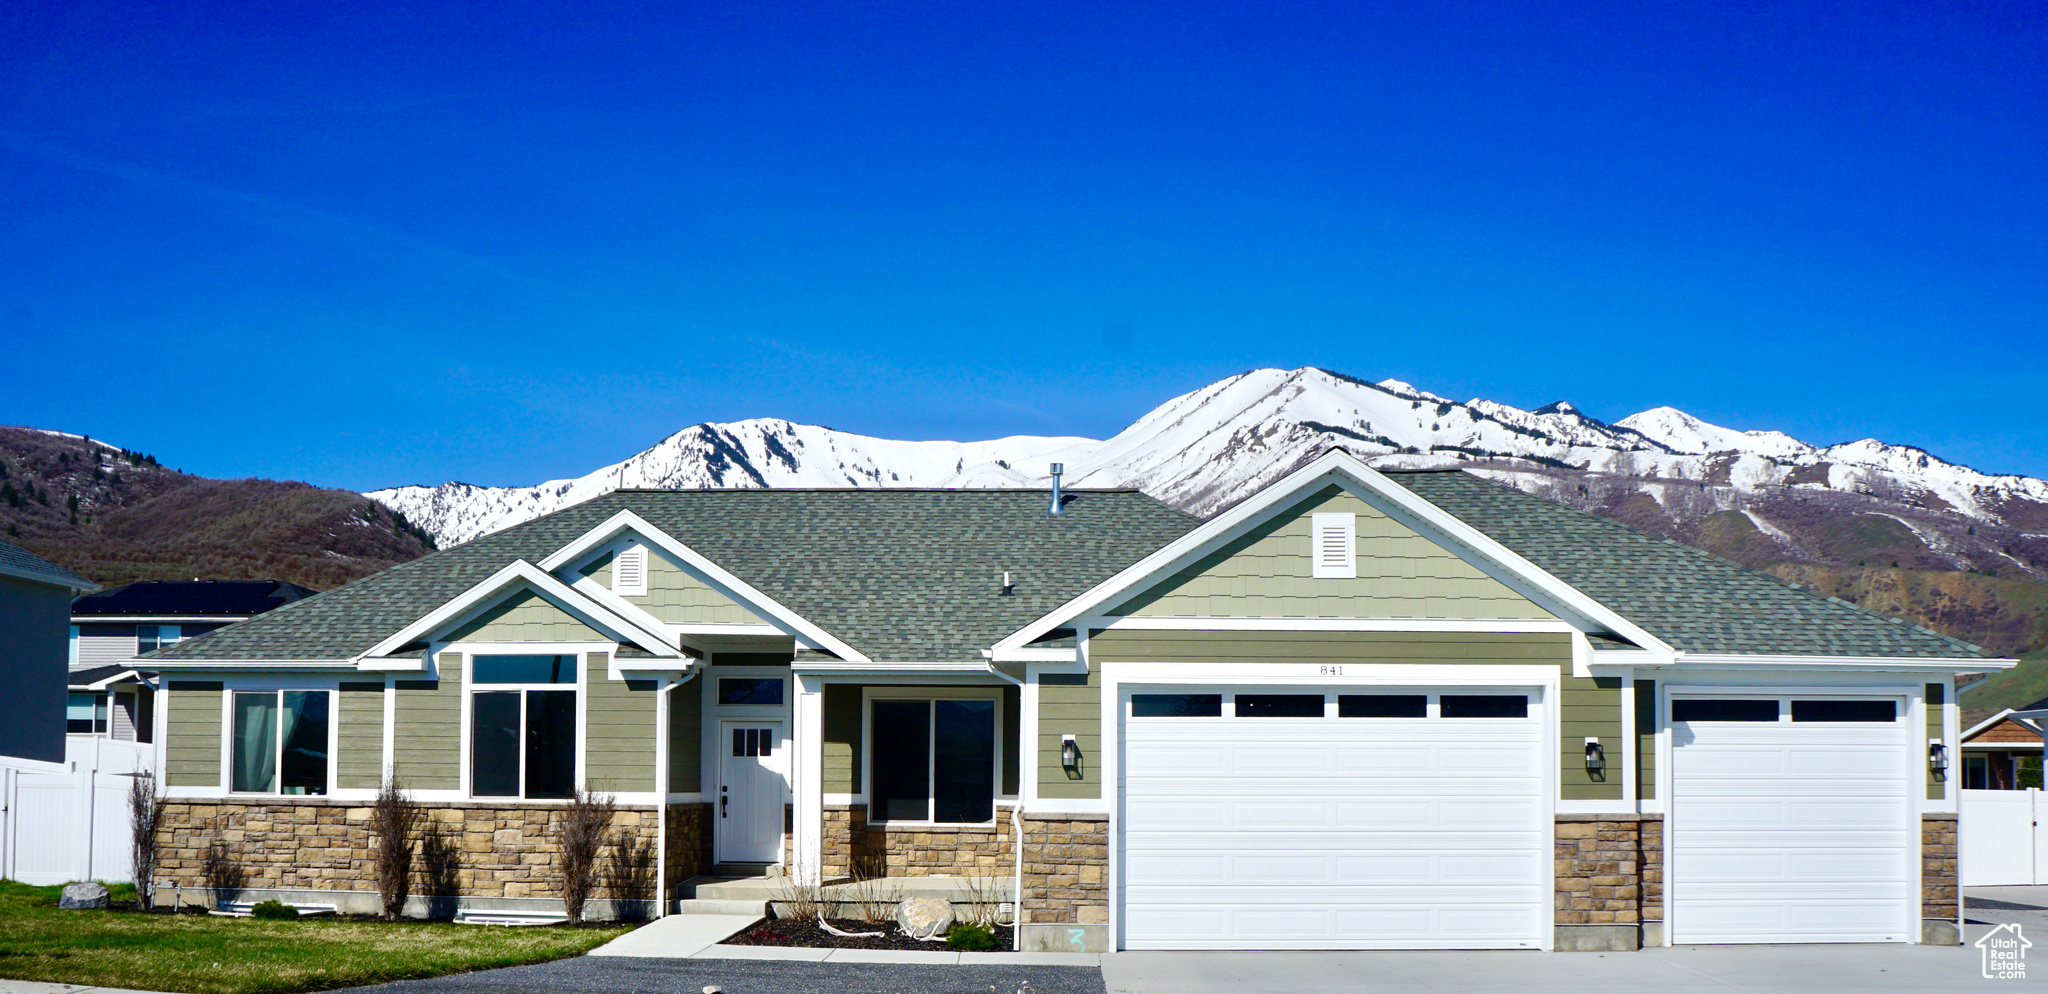 Craftsman inspired home with a mountain view and a garage beautiful views and 3 car garage with extra heighth and width.